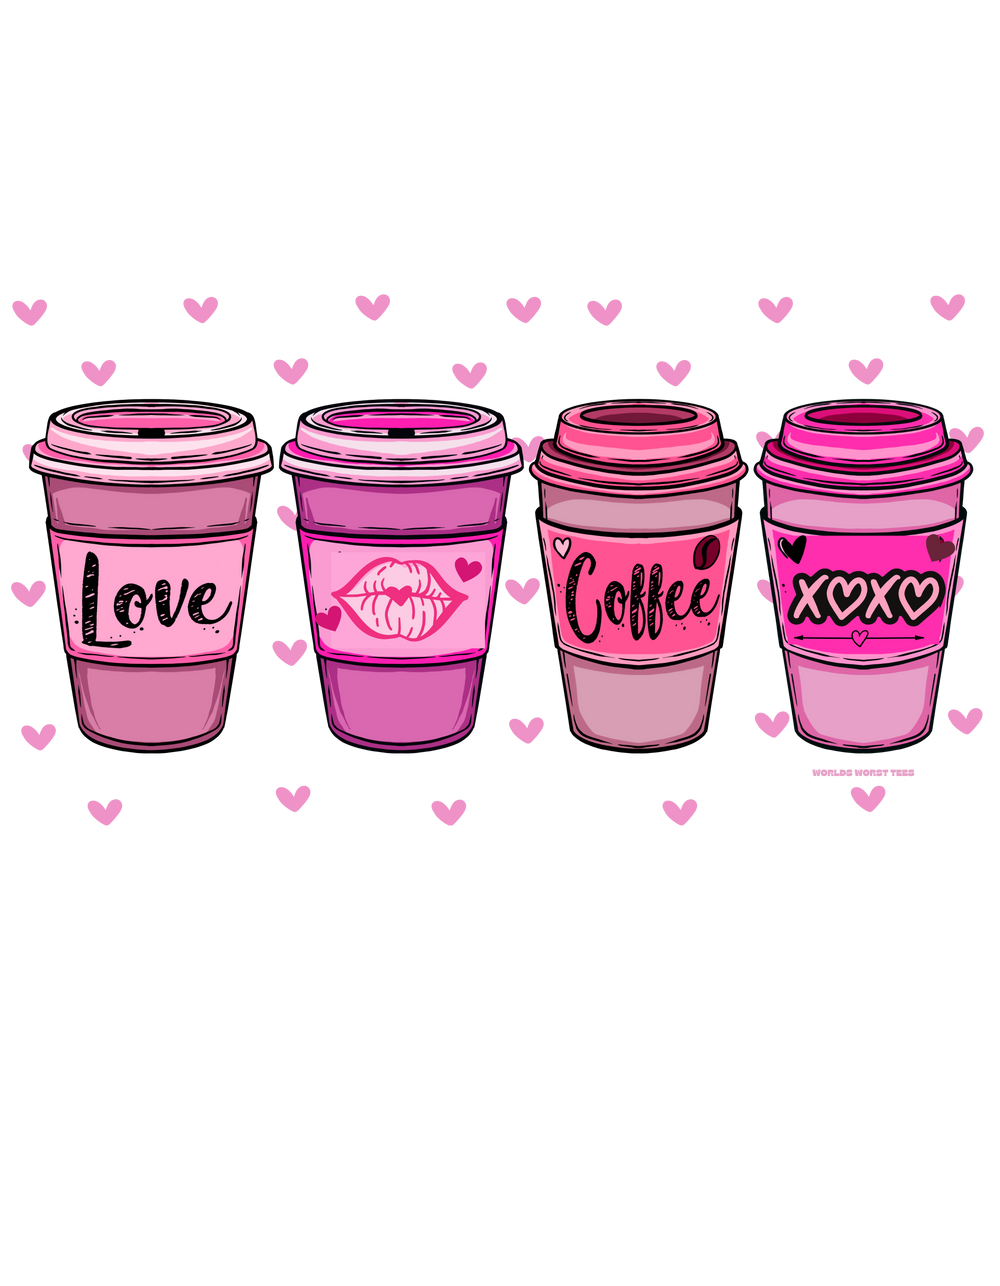 A cozy XOXO Coffee Crew sweatshirt featuring a pink cup with a lid design, made of 50% cotton and 50% polyester blend for comfort and style. Sizes from S to 5XL available.